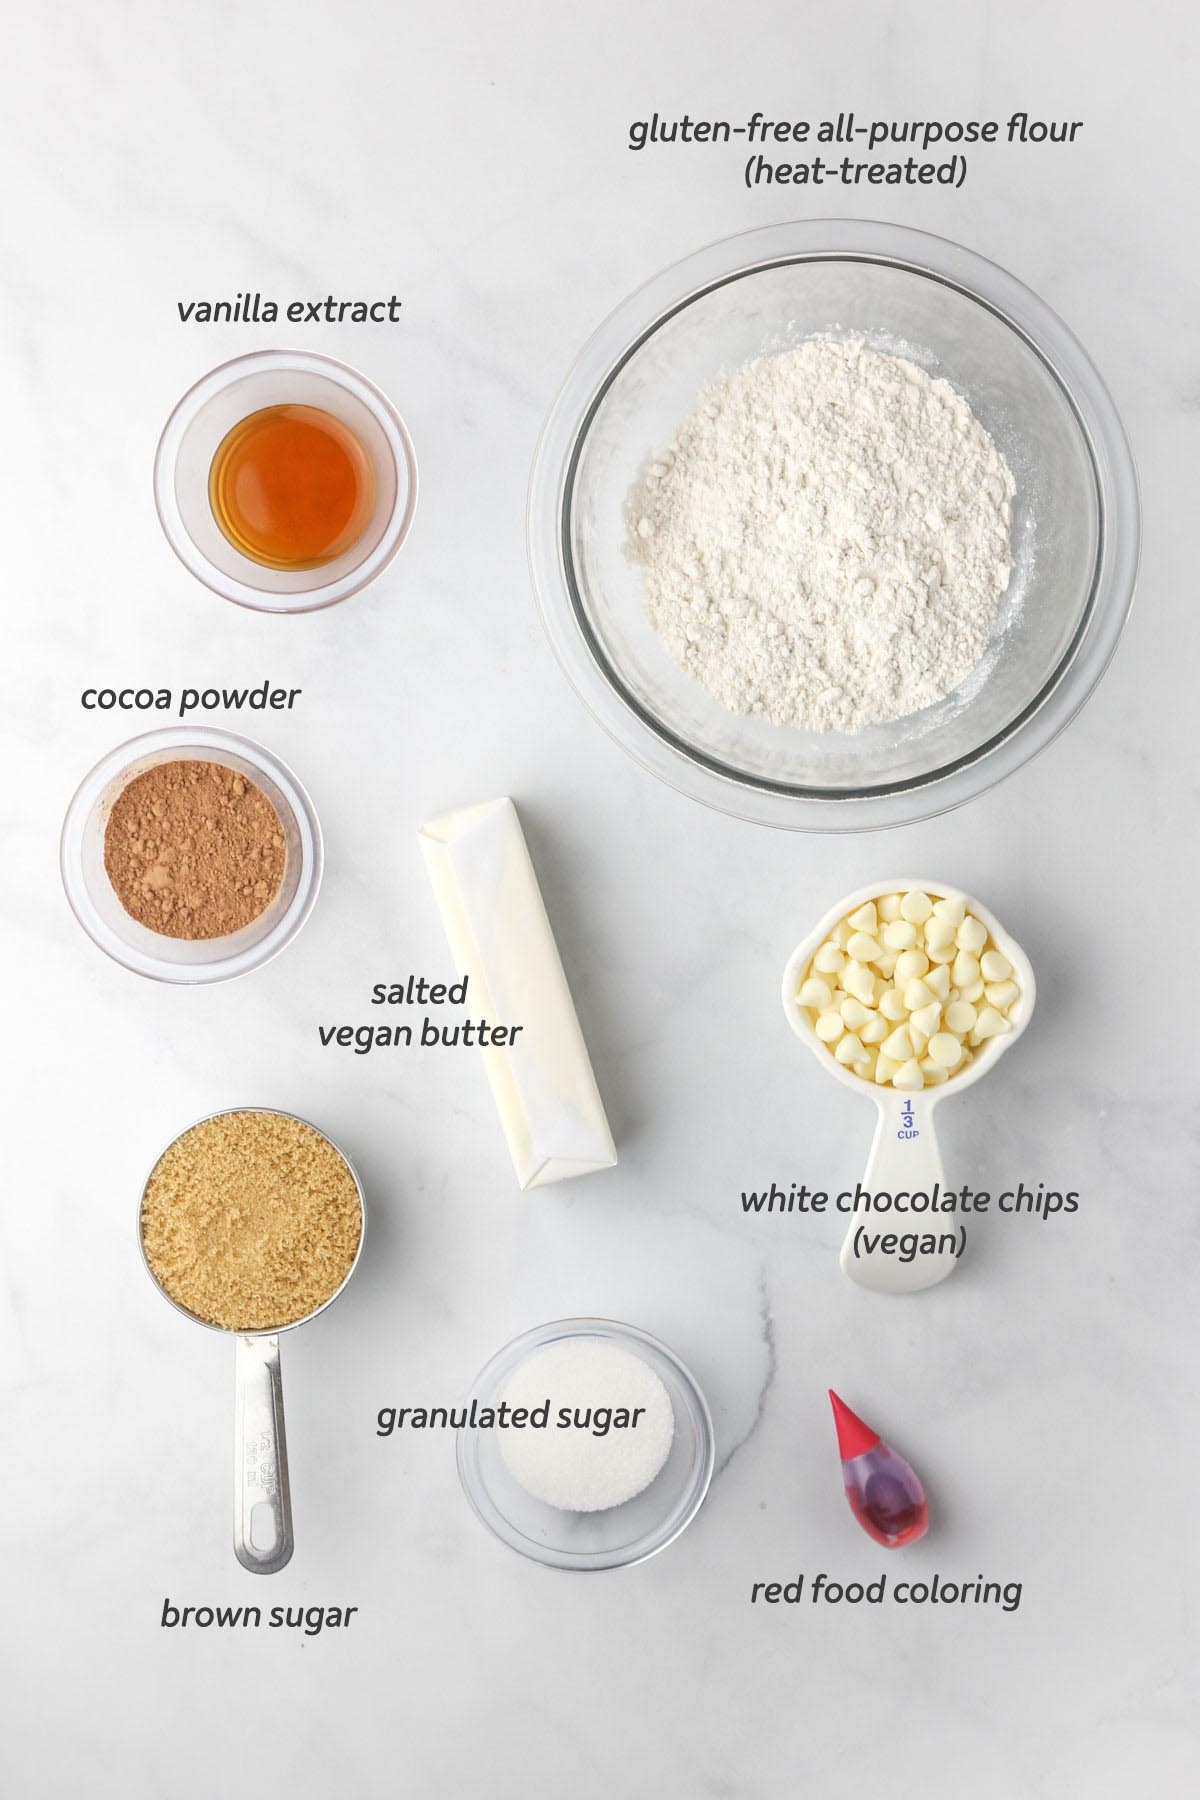 all ingredients to make the dough shown from above.